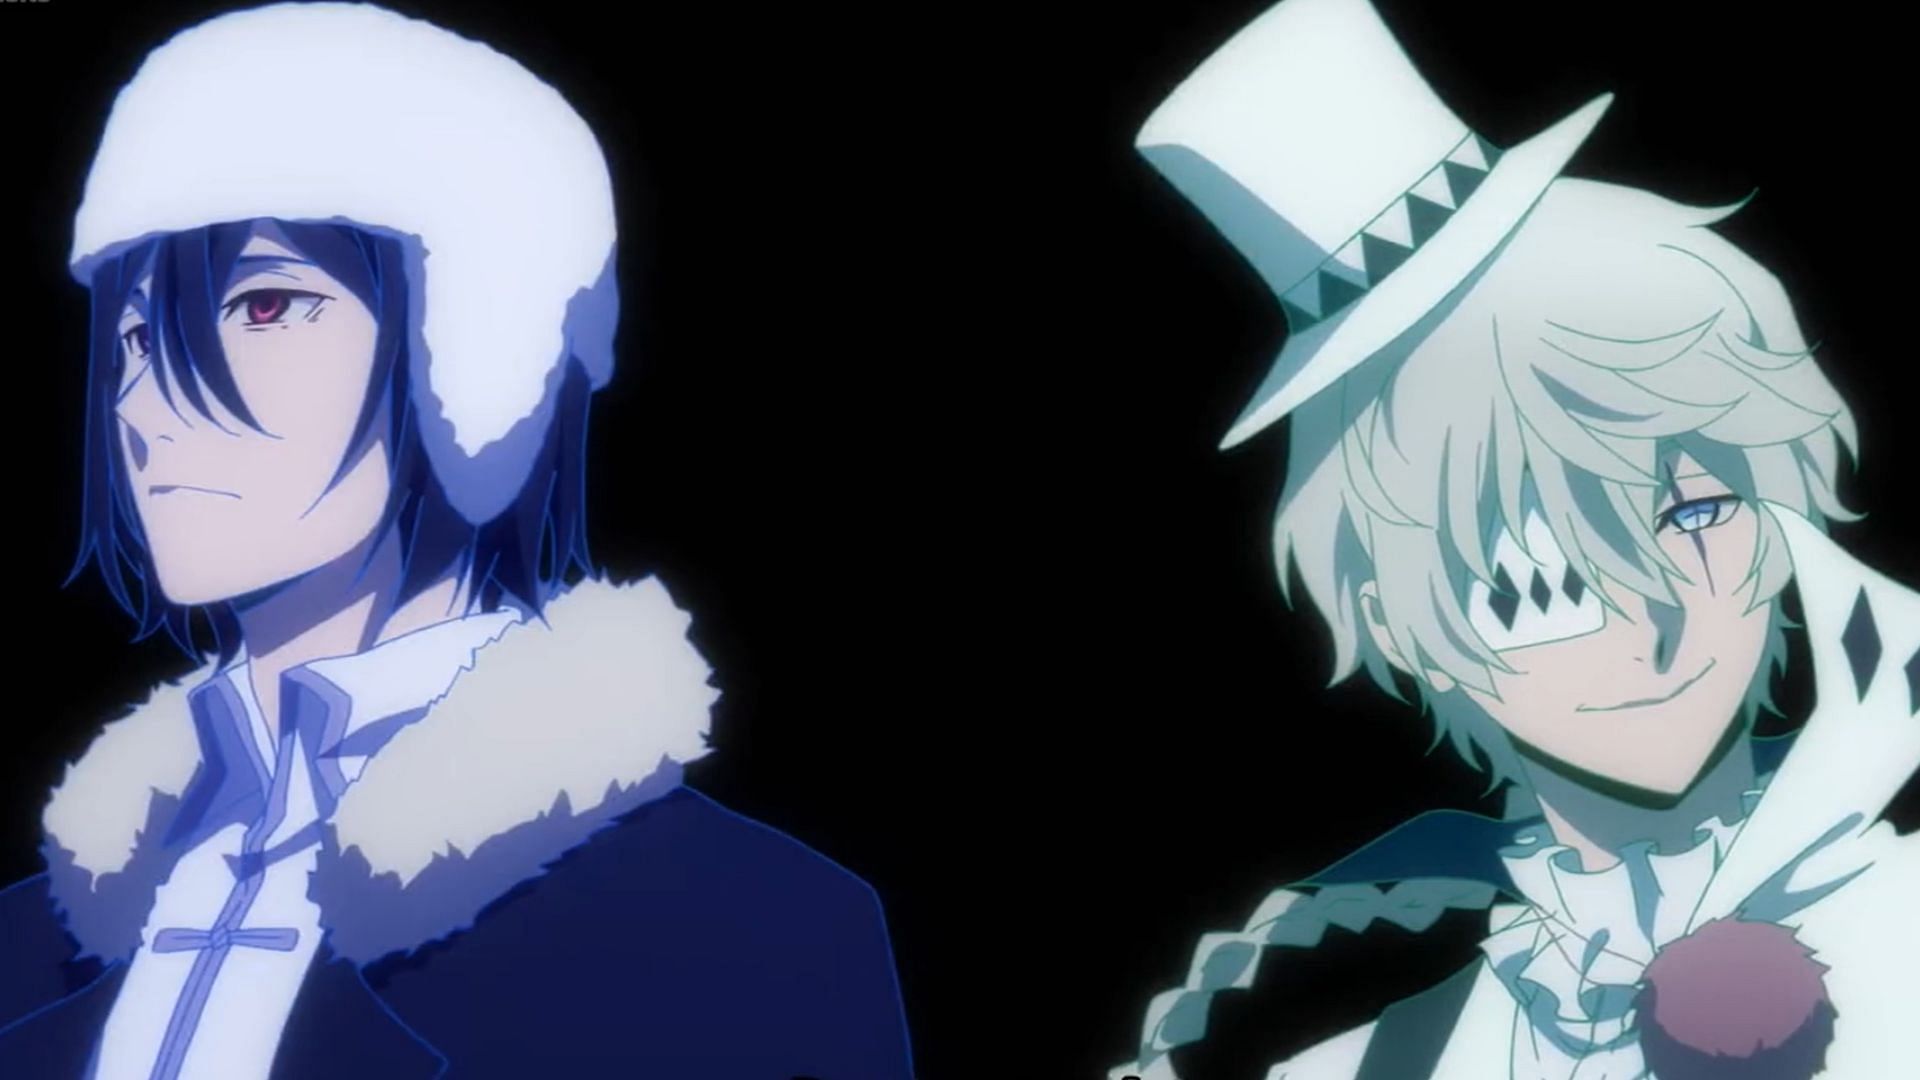 Fyodor and Gogol as seen in the anime (Image via BONES)